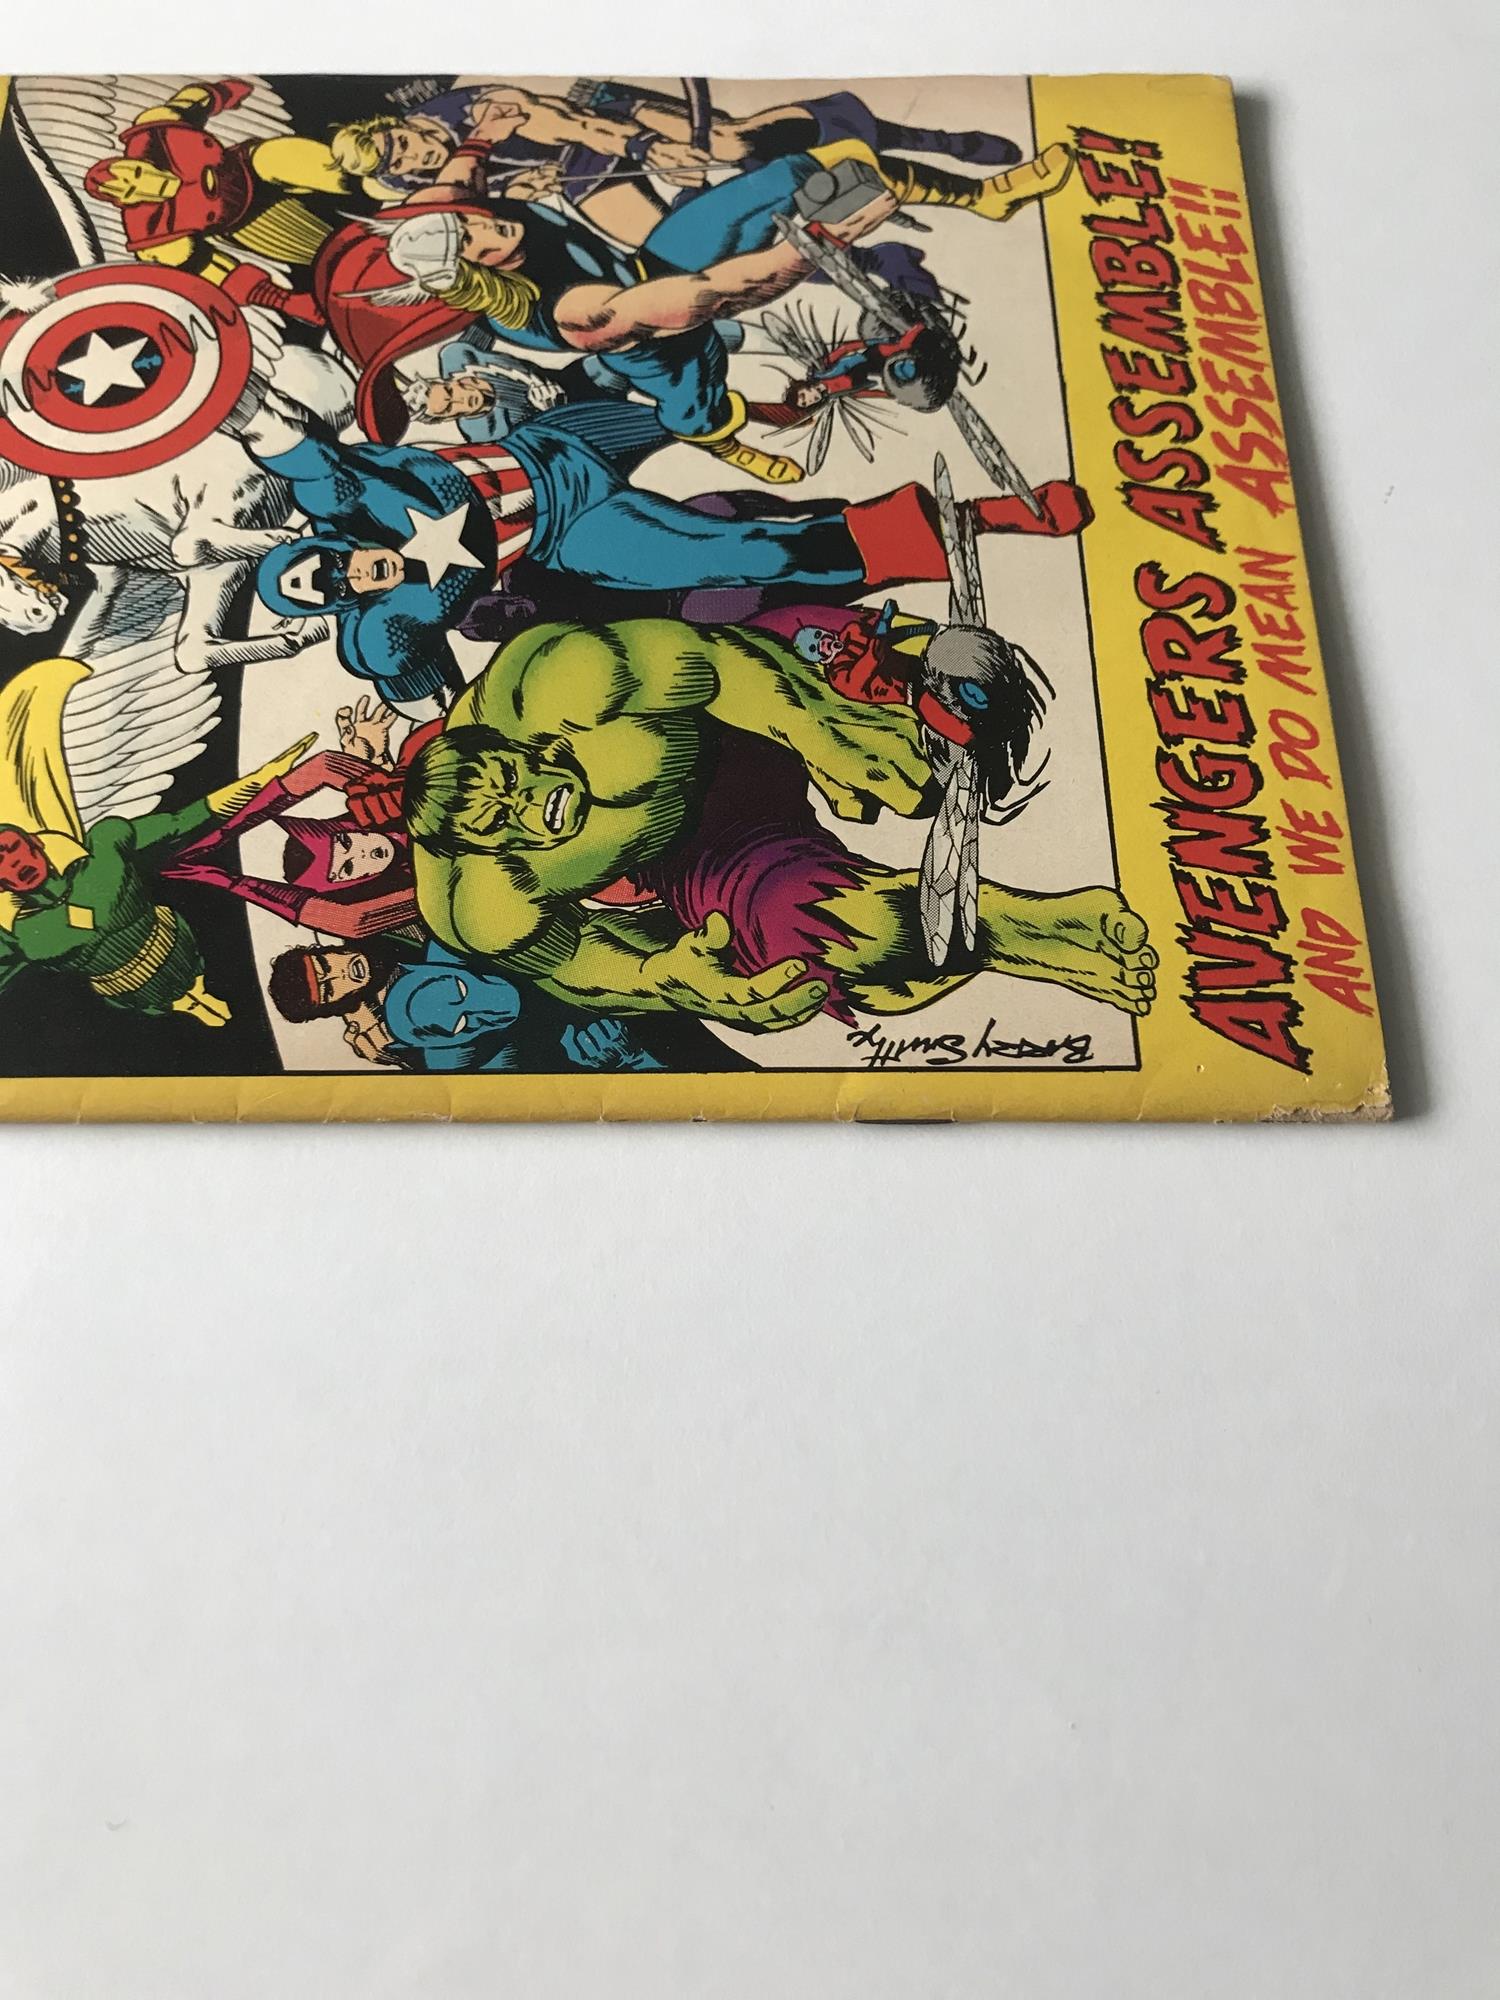 AVENGERS # 100 (1972 - MARVEL - Pence Copy) - Barry Windsor Smith cover and interior art + - Image 7 of 7